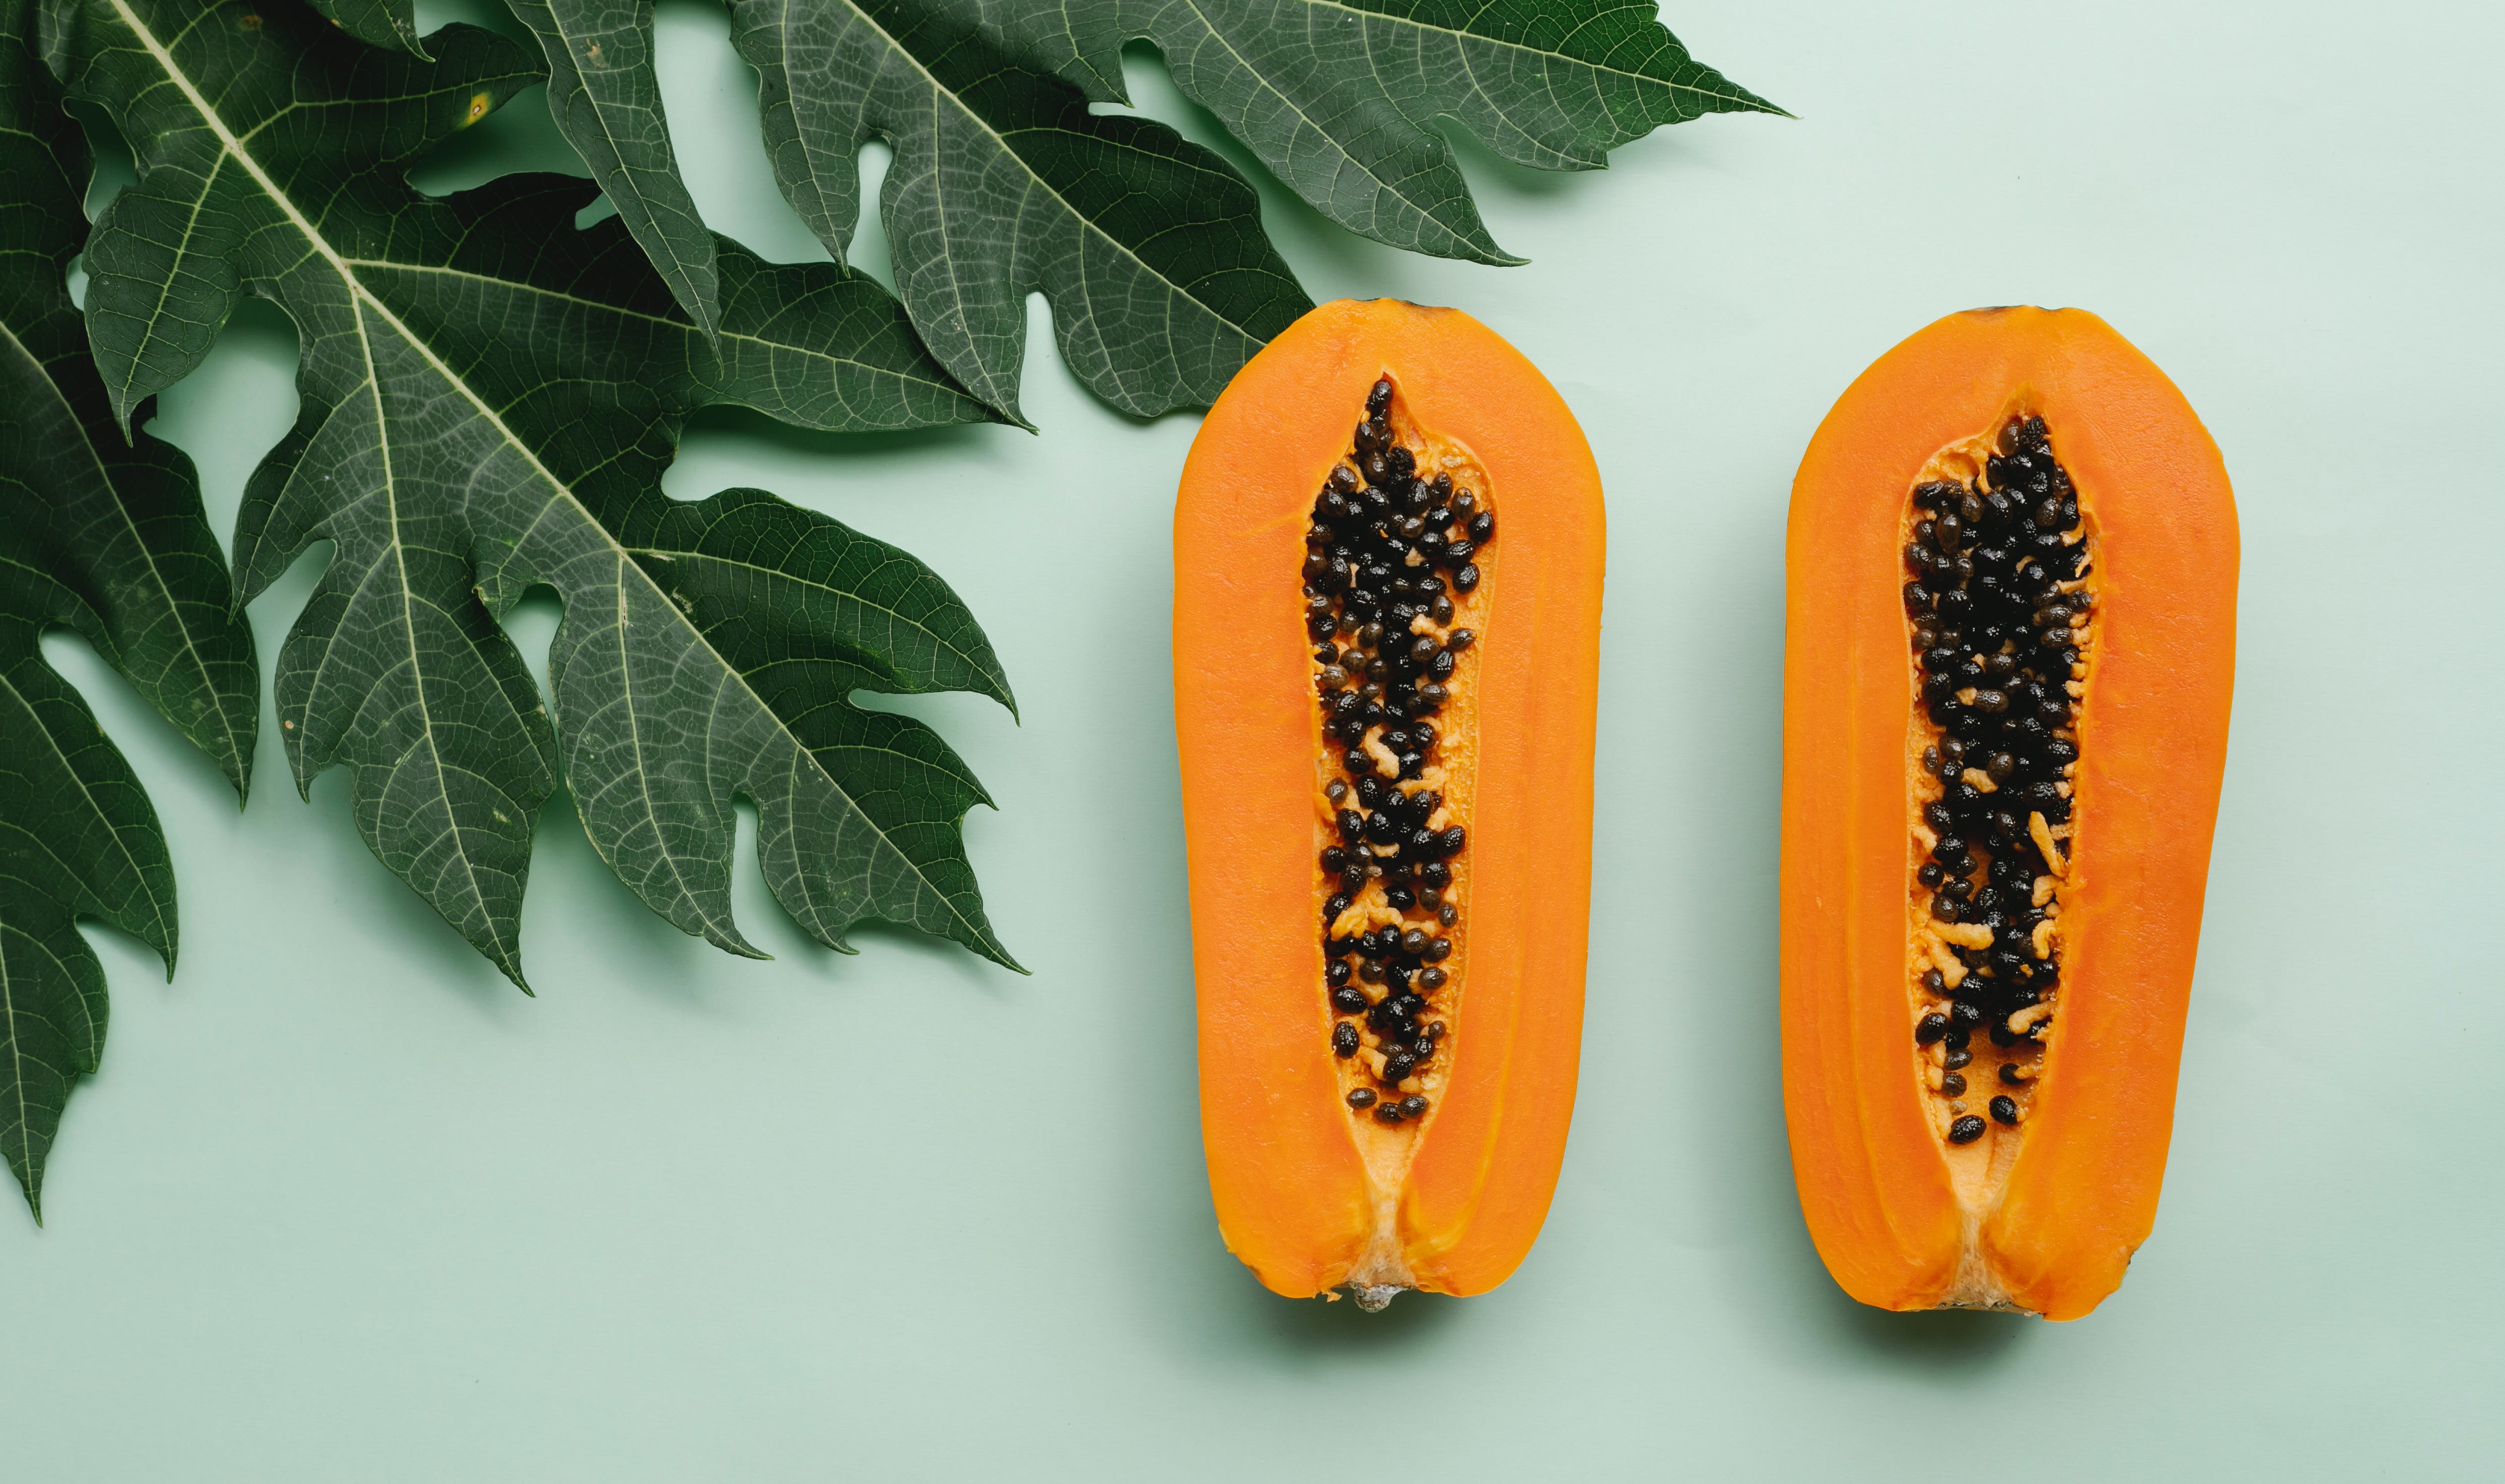 Fruits you can farm and grow in a greenhouse: Papayas